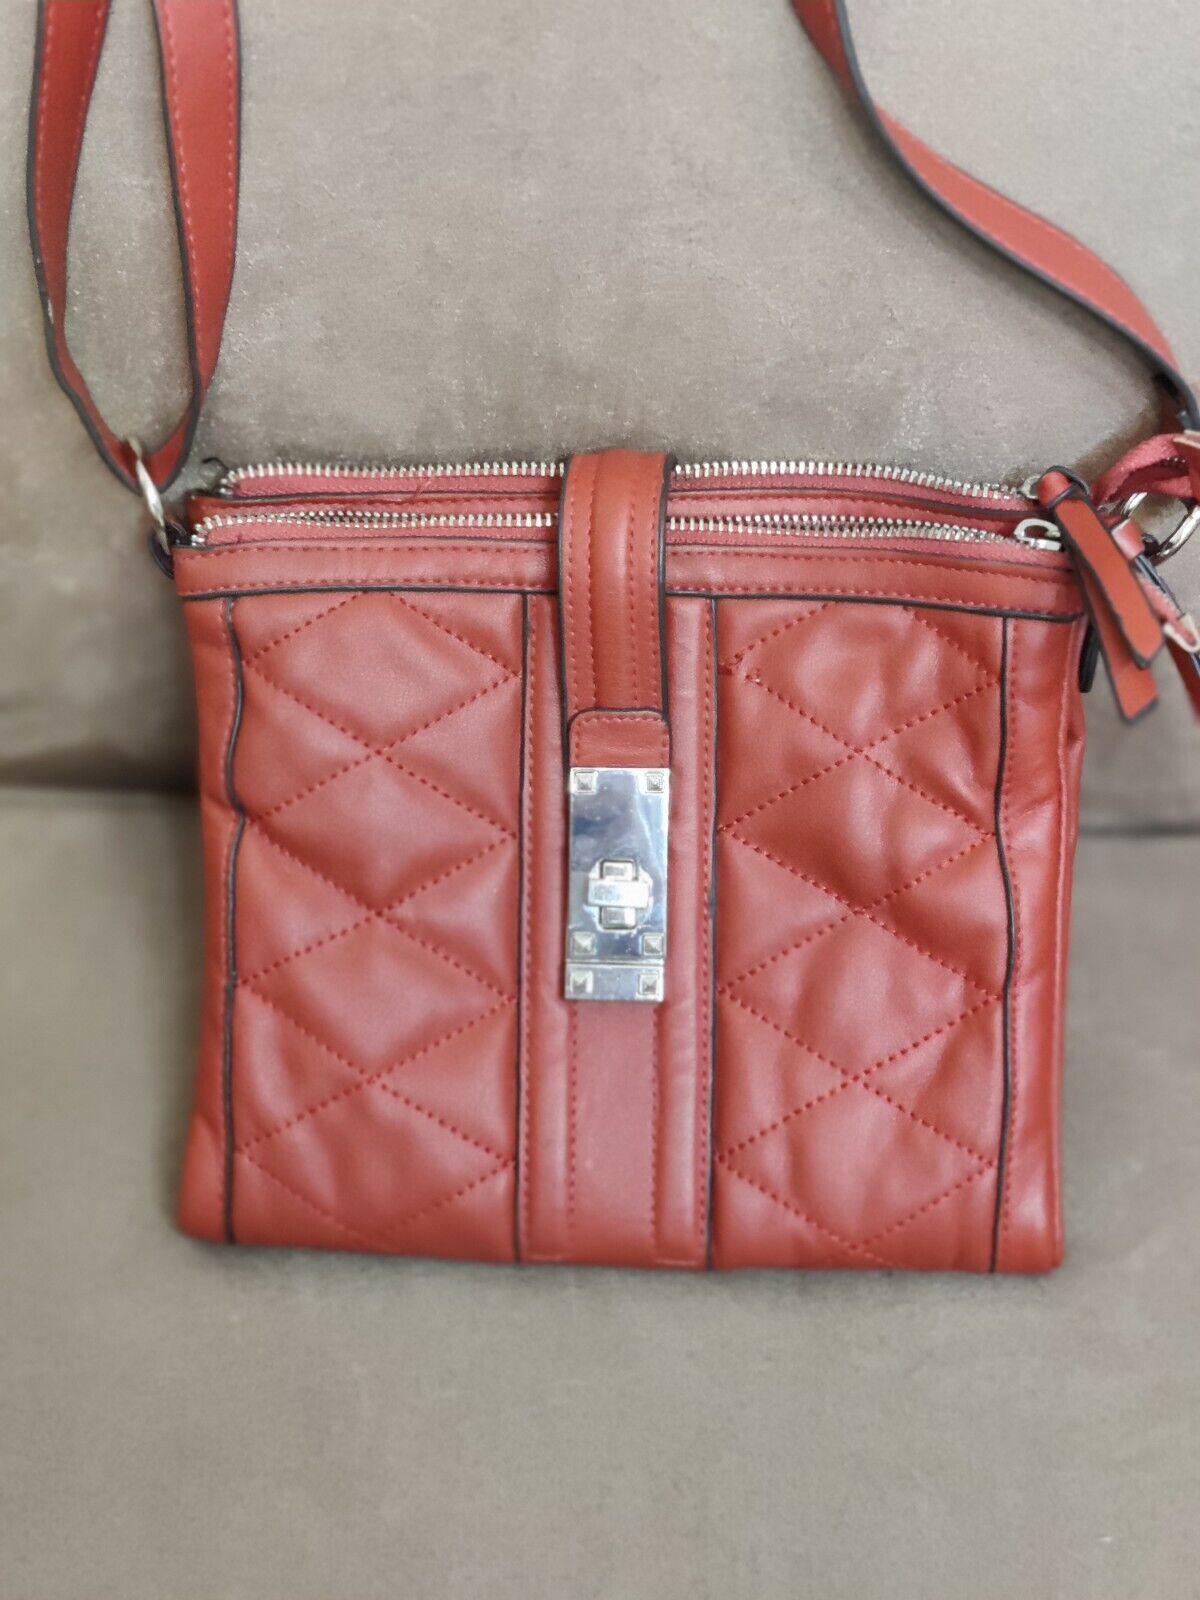 NEW Jessica Simpson Cross Body Purse - clothing & accessories - by owner -  apparel sale - craigslist